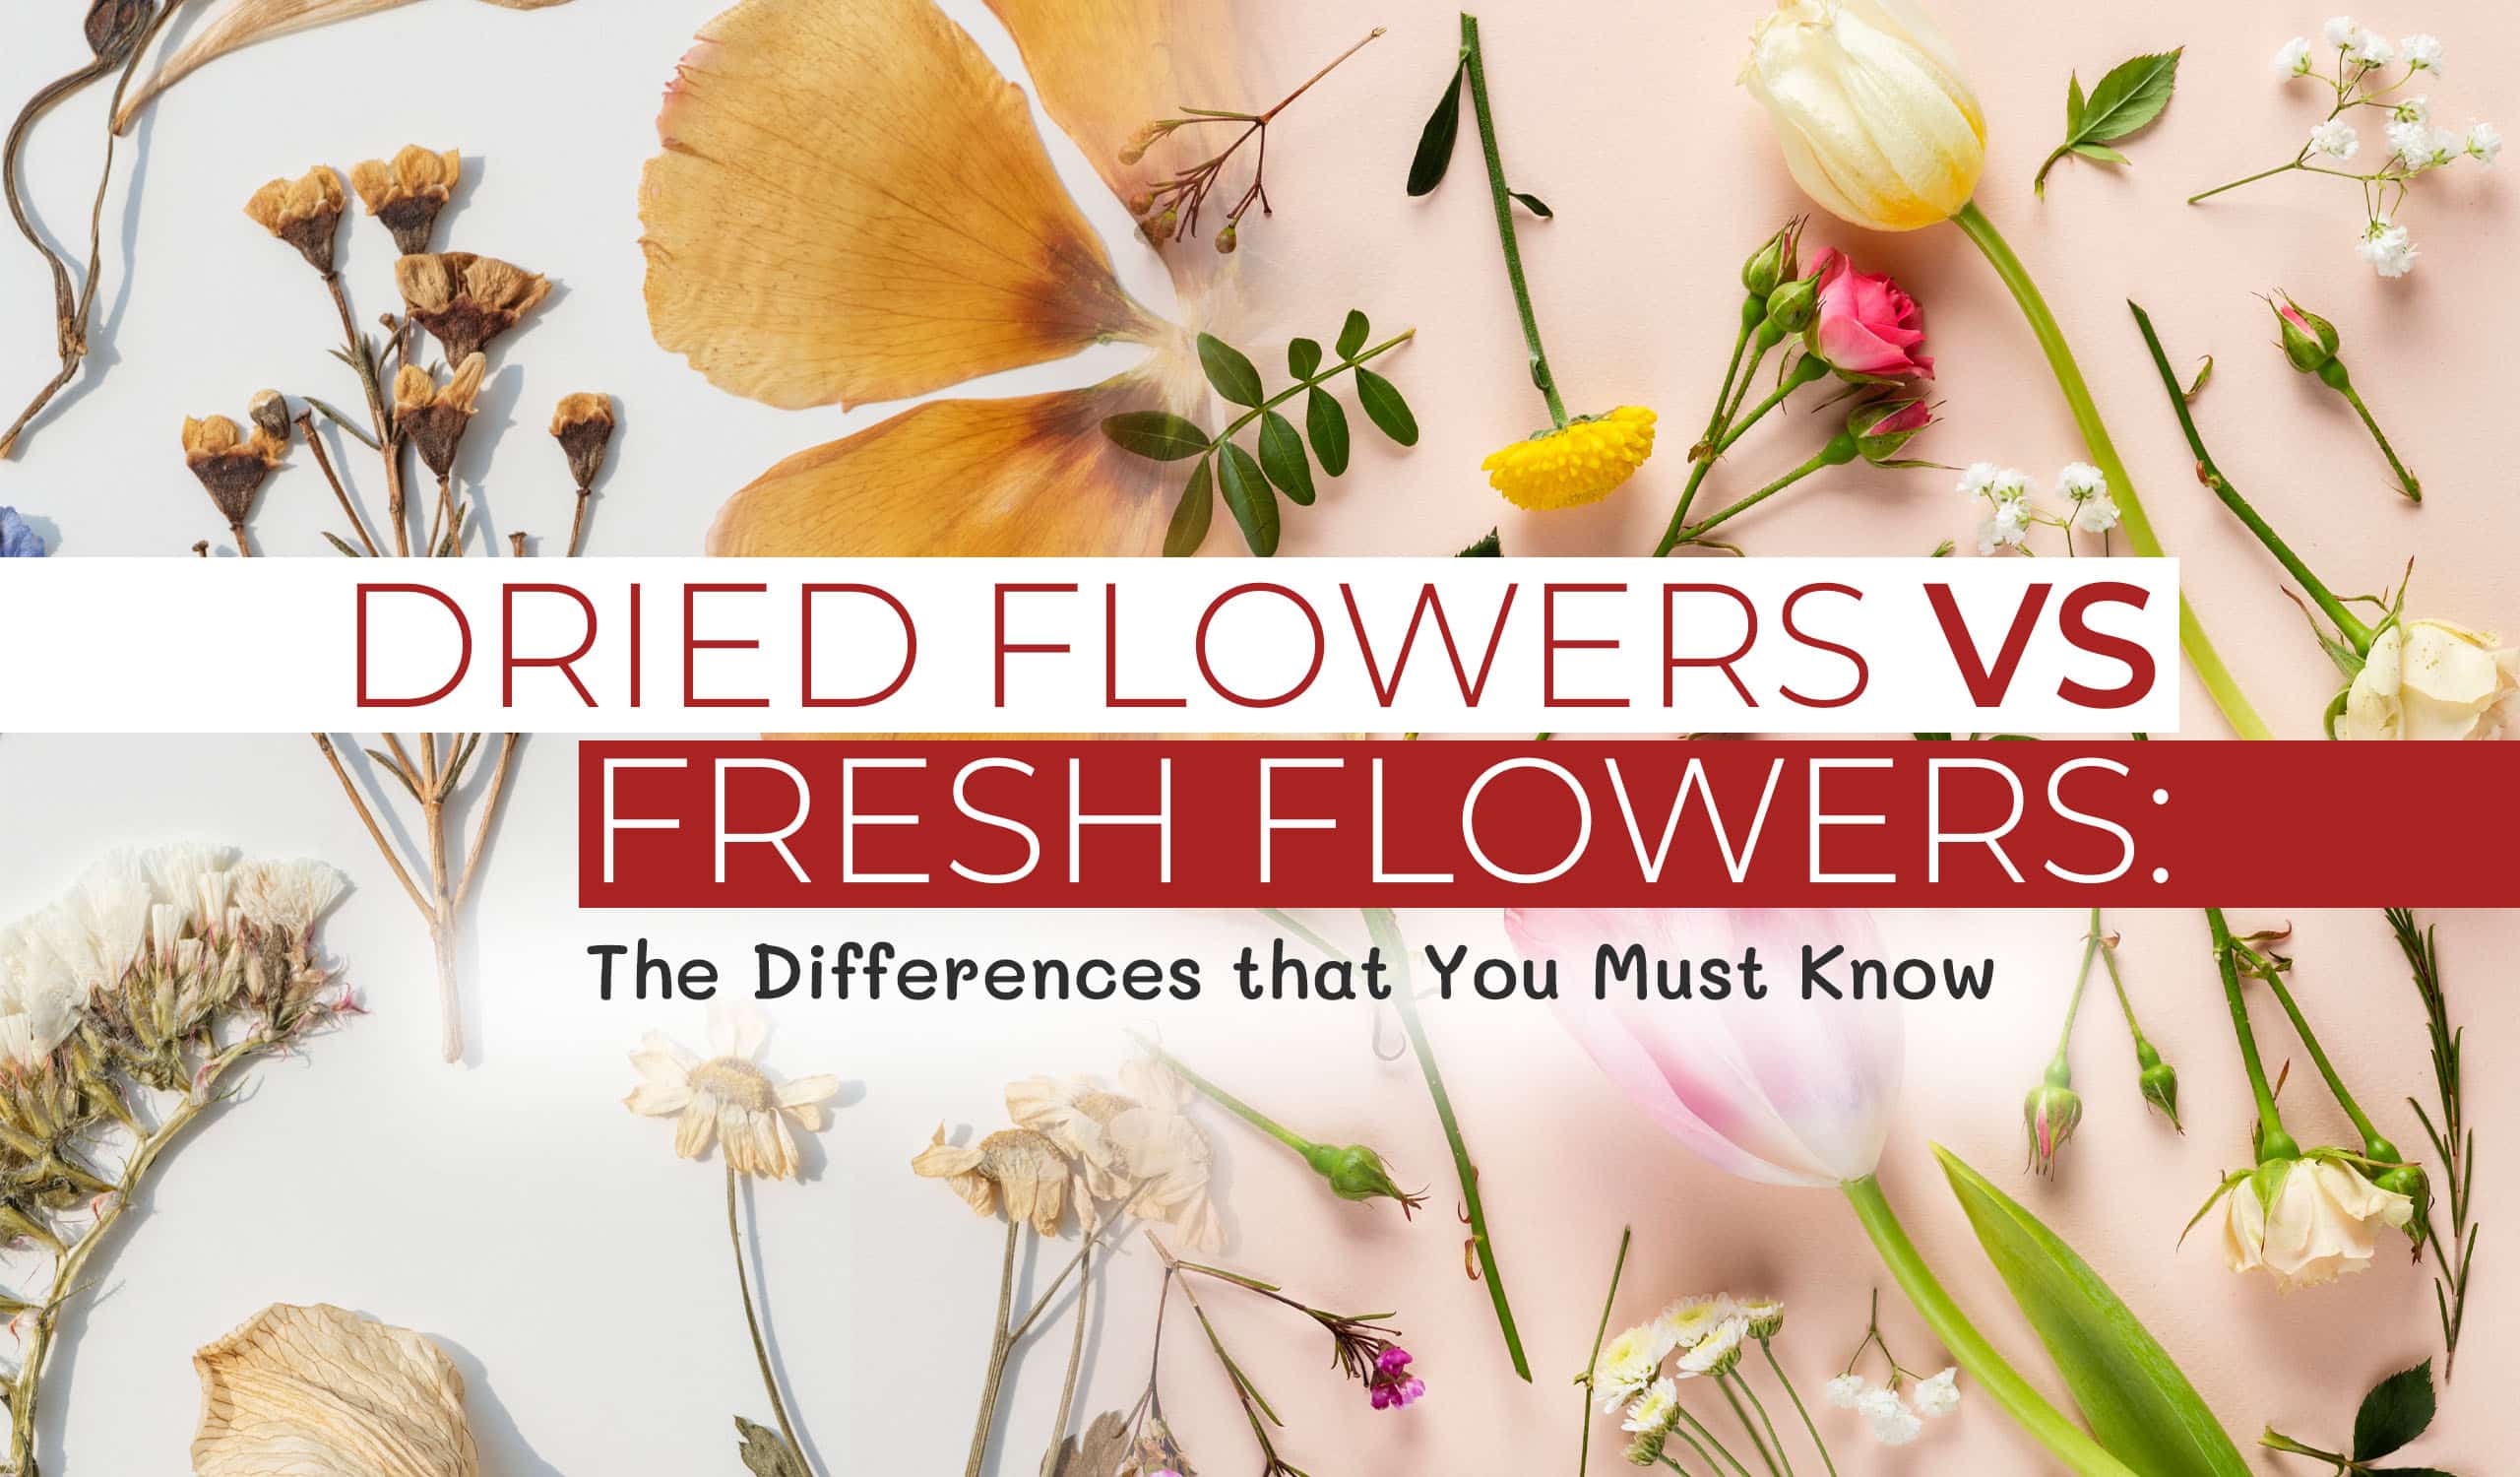 Dried Flowers vs Fresh Flowers: The Differences that You Must Know